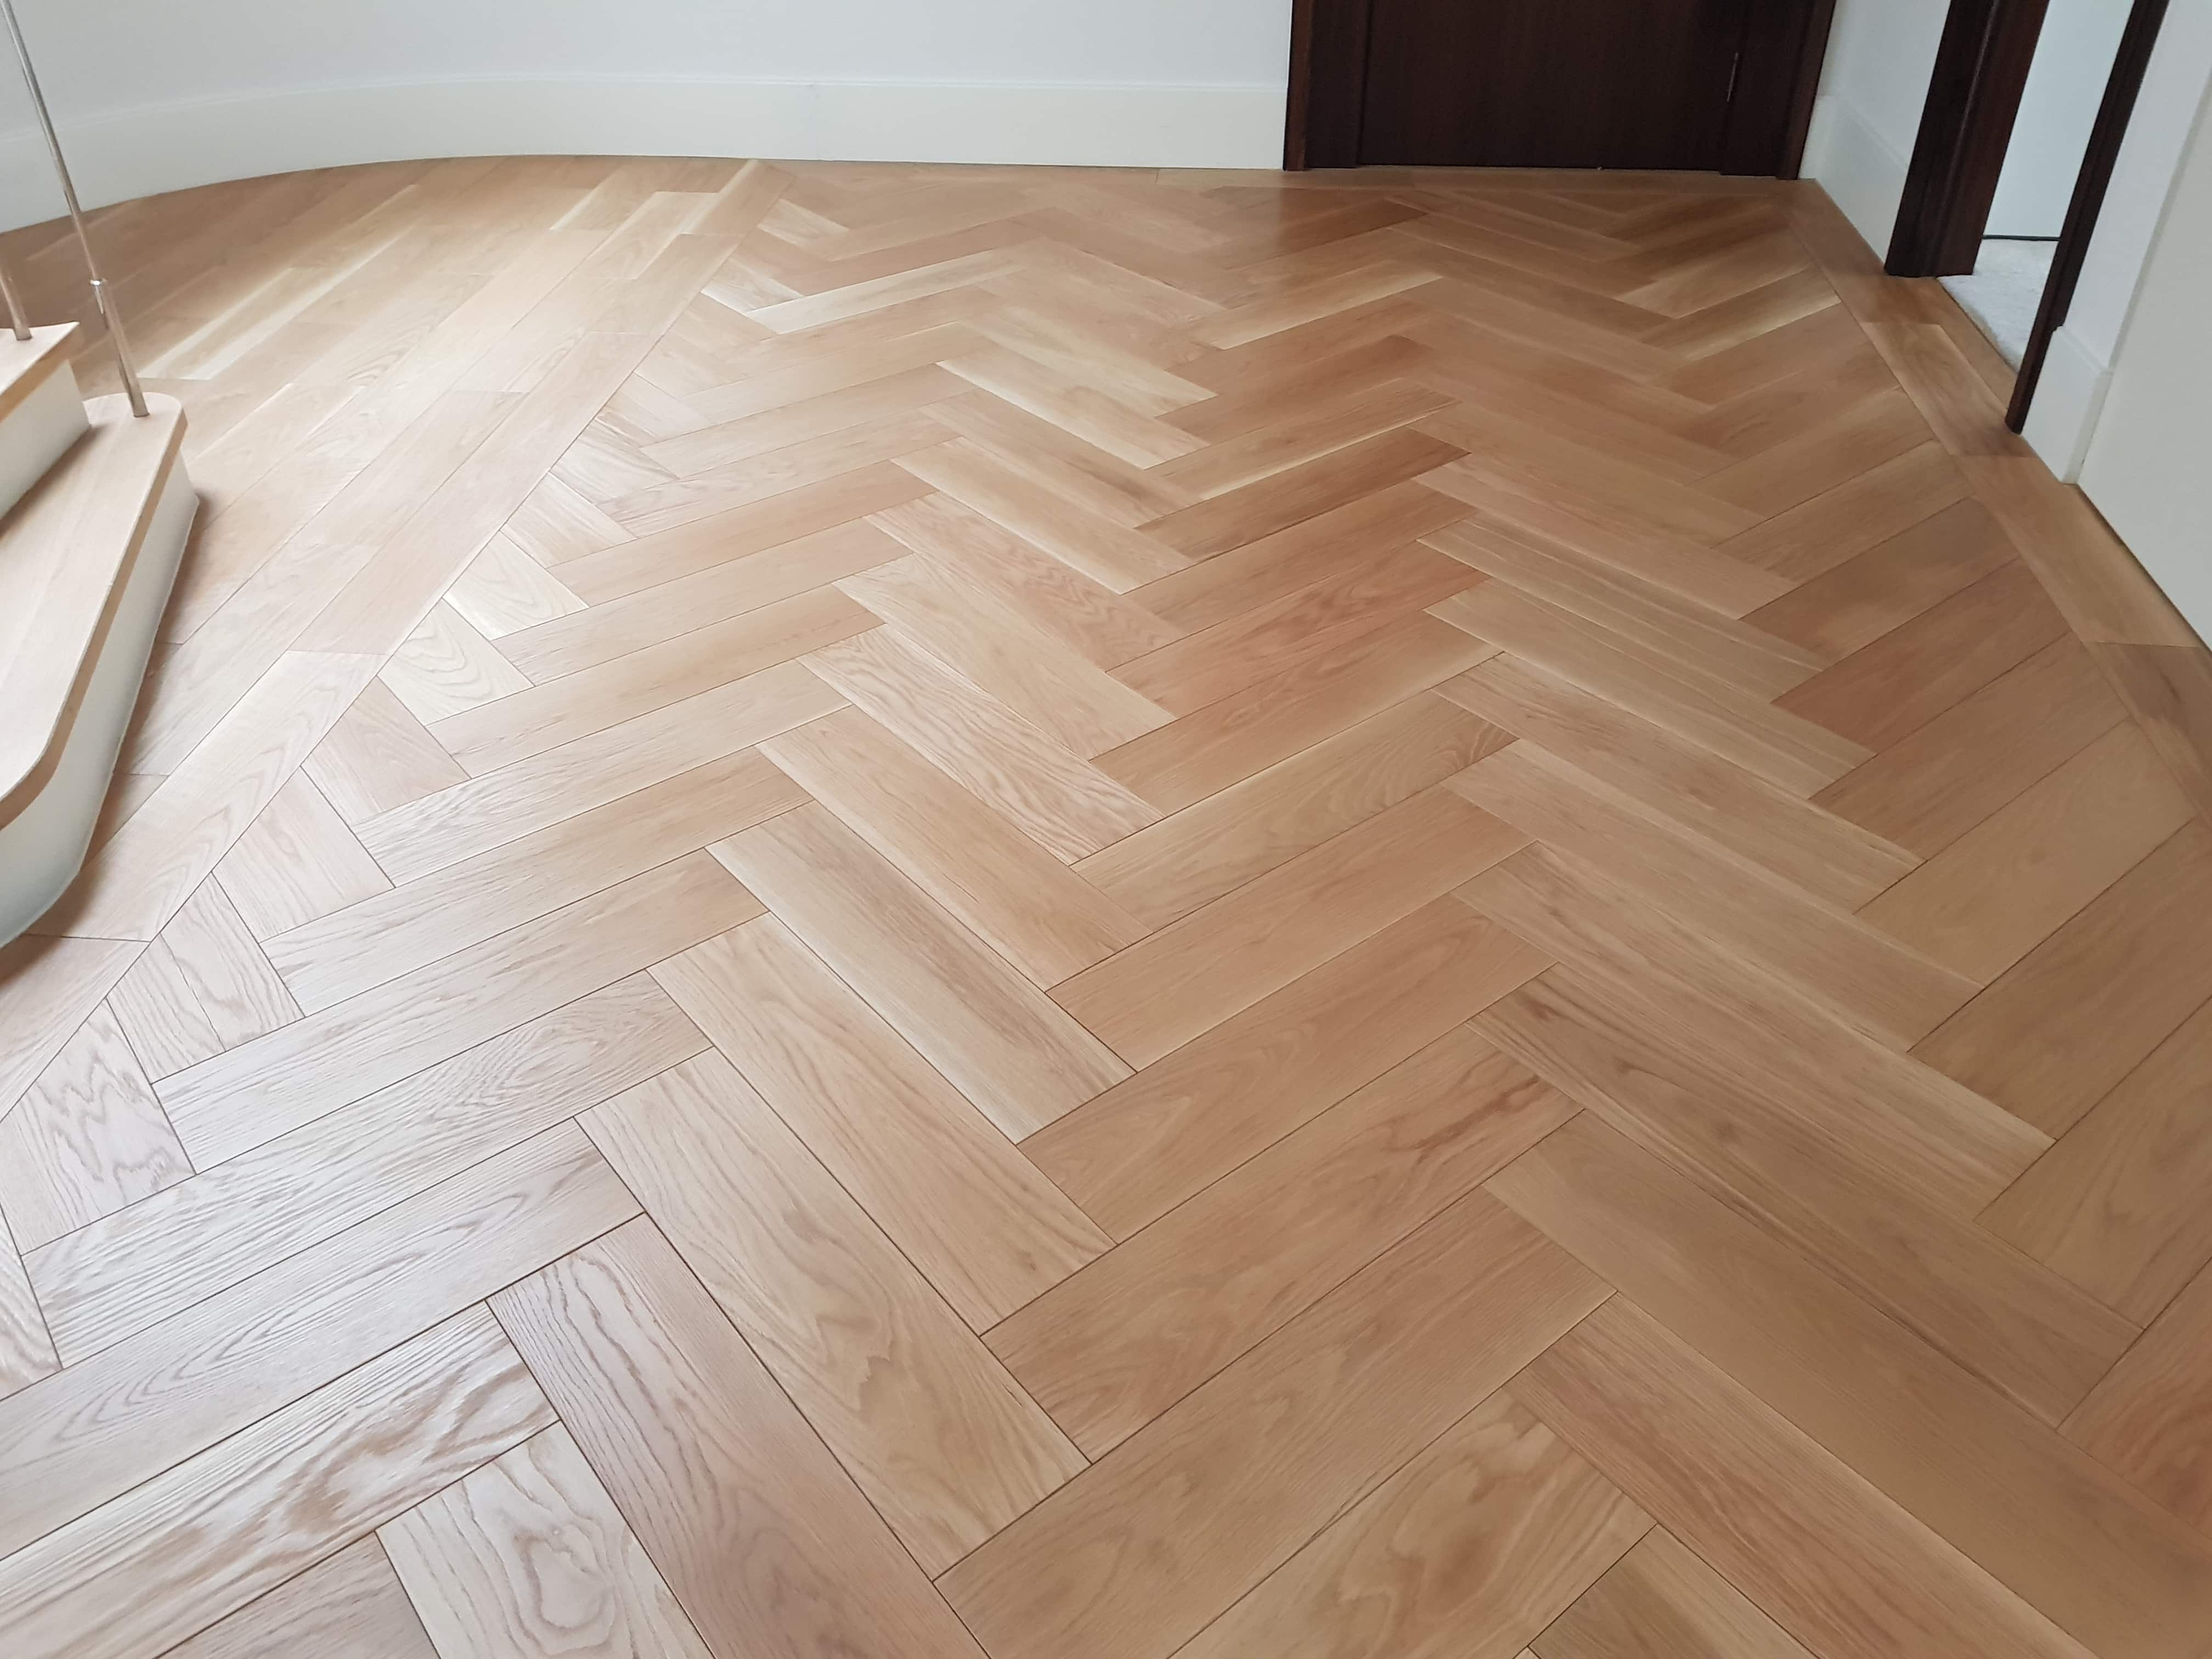 Parquet, sanded, gap filled with resin and sealed with 4 coats of matt natural seal.